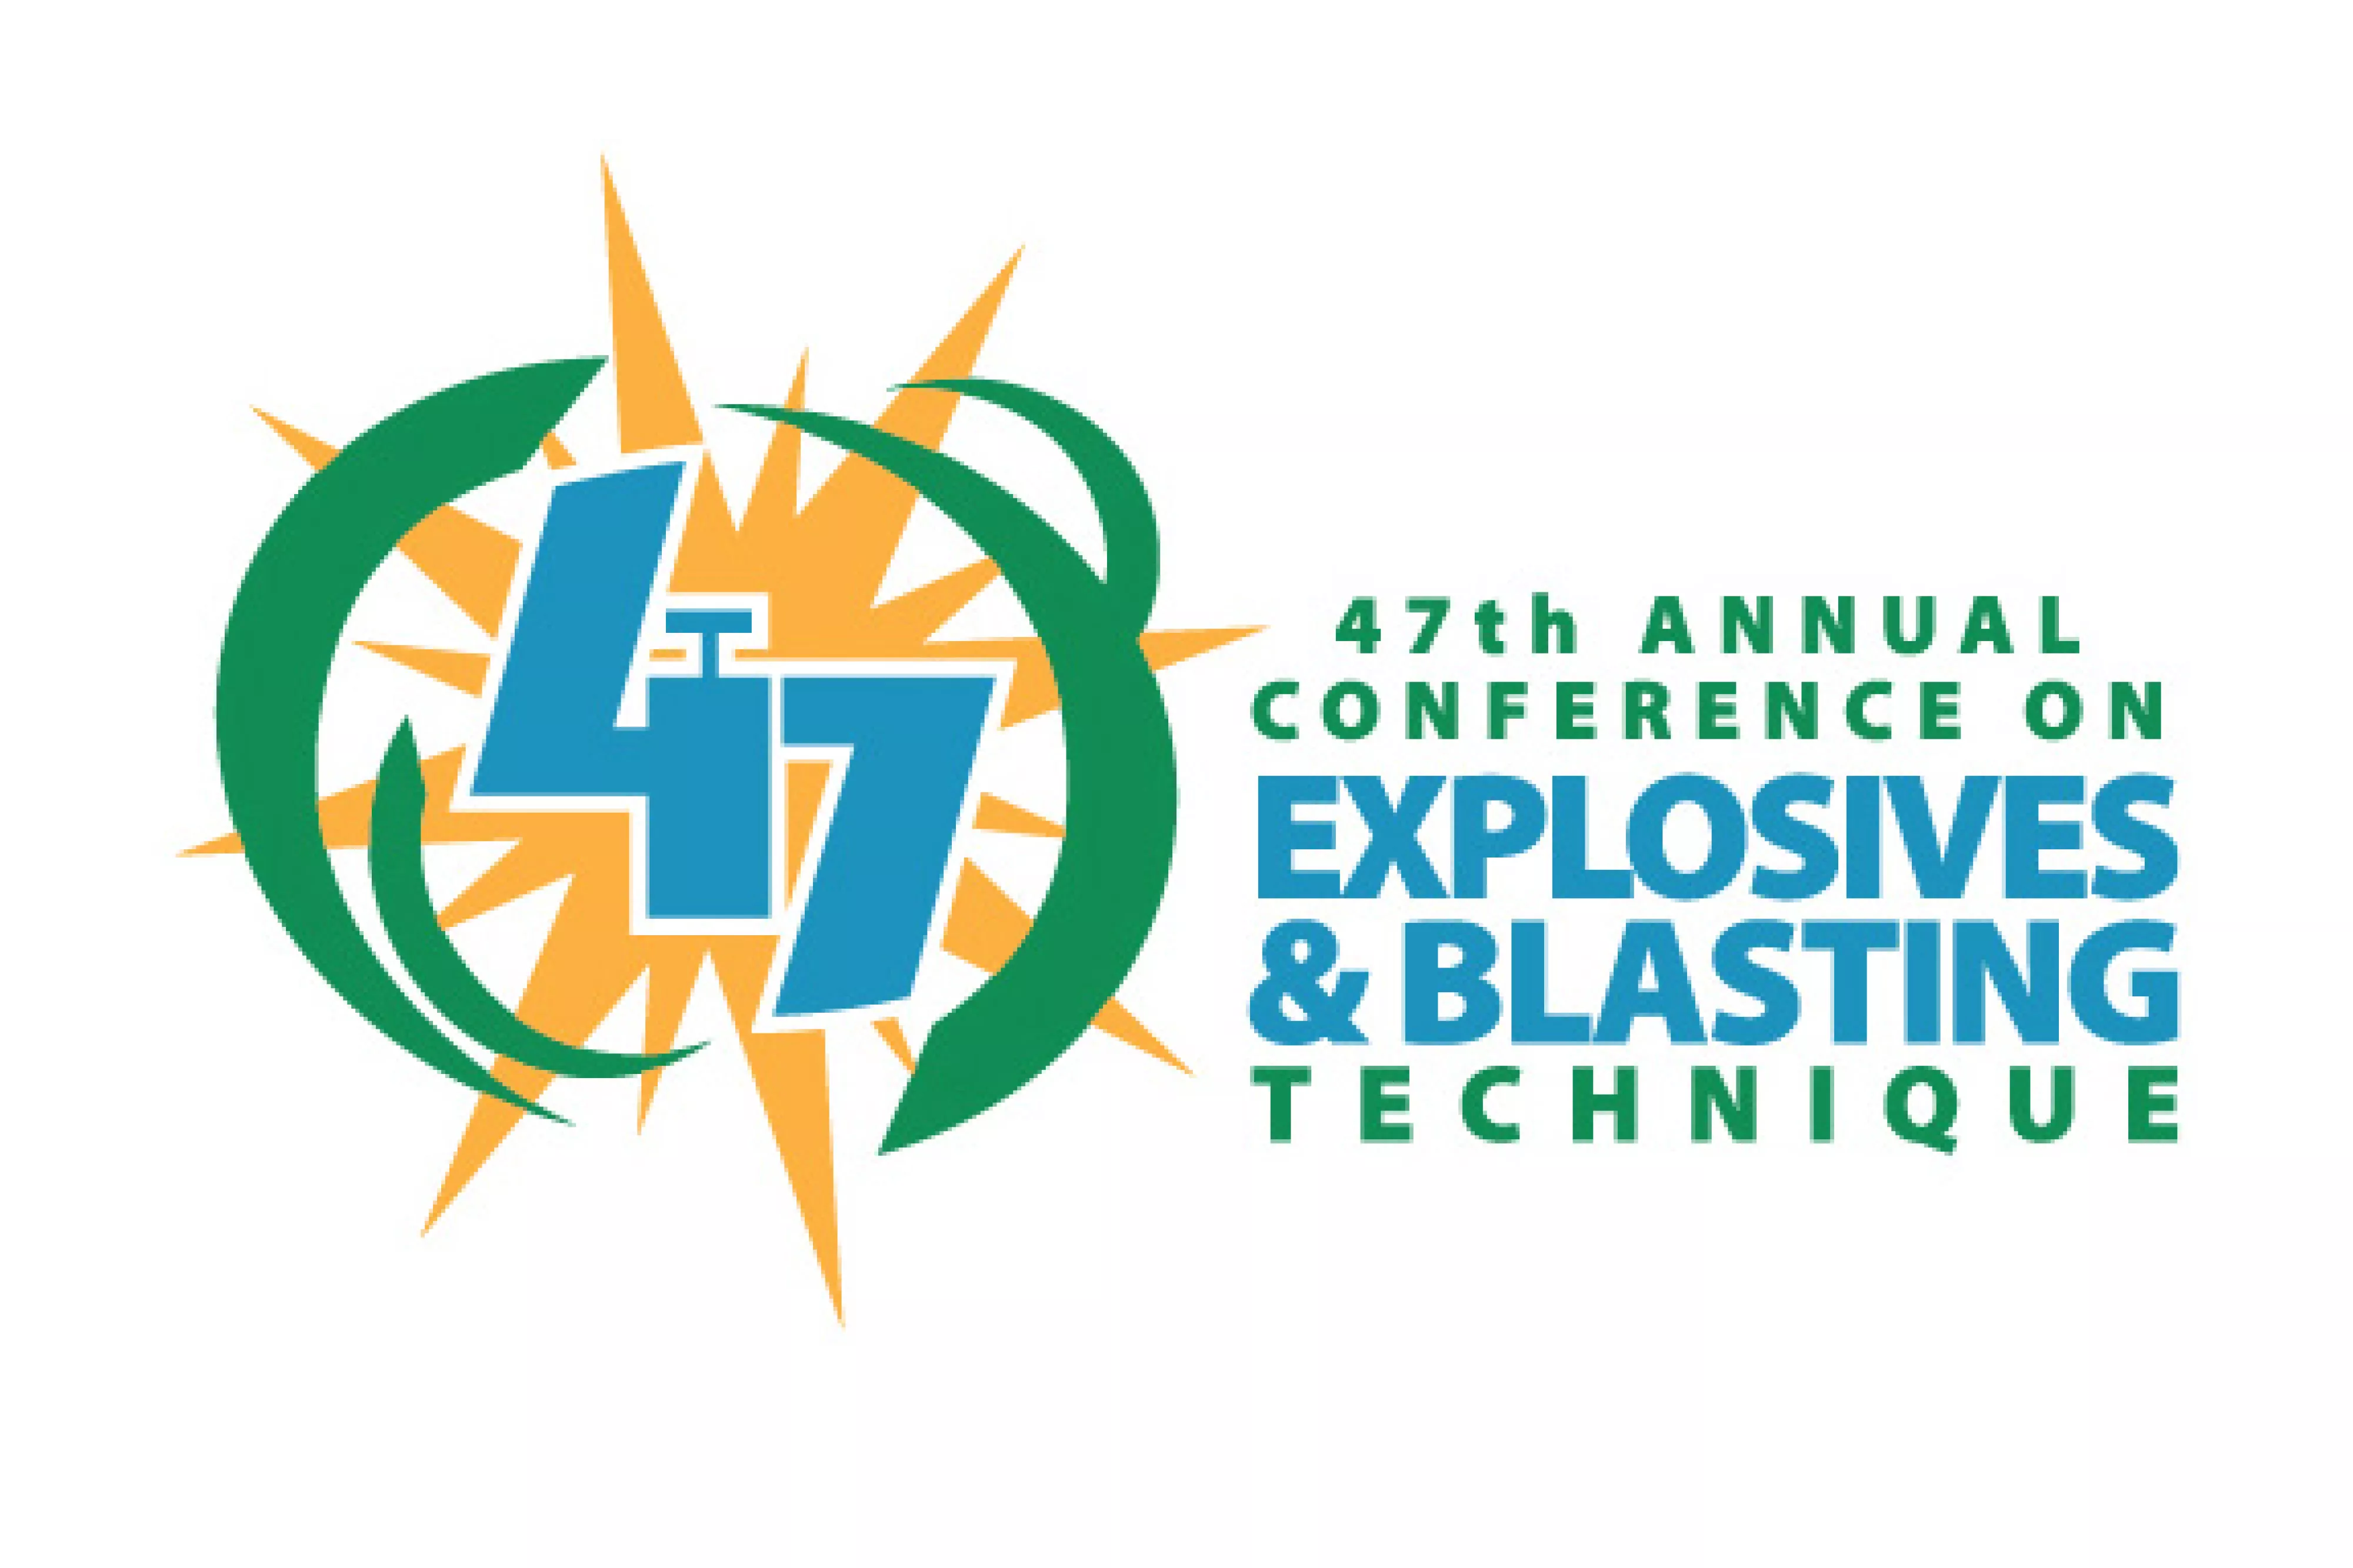 47th Annual Conference on Explosives & Blasting Technique